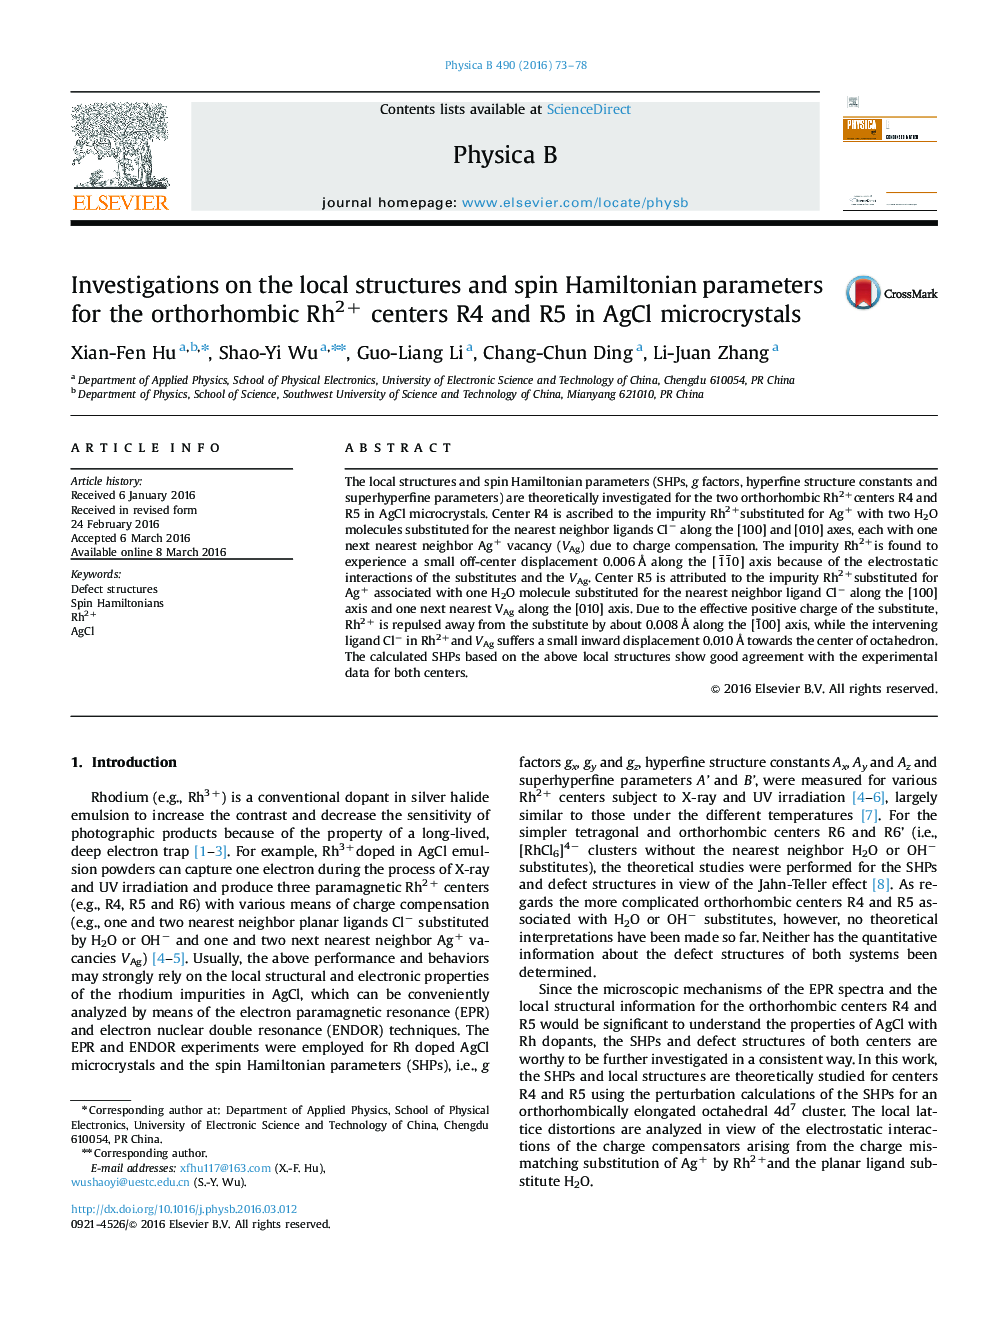 Investigations on the local structures and spin Hamiltonian parameters for the orthorhombic Rh2+ centers R4 and R5 in AgCl microcrystals